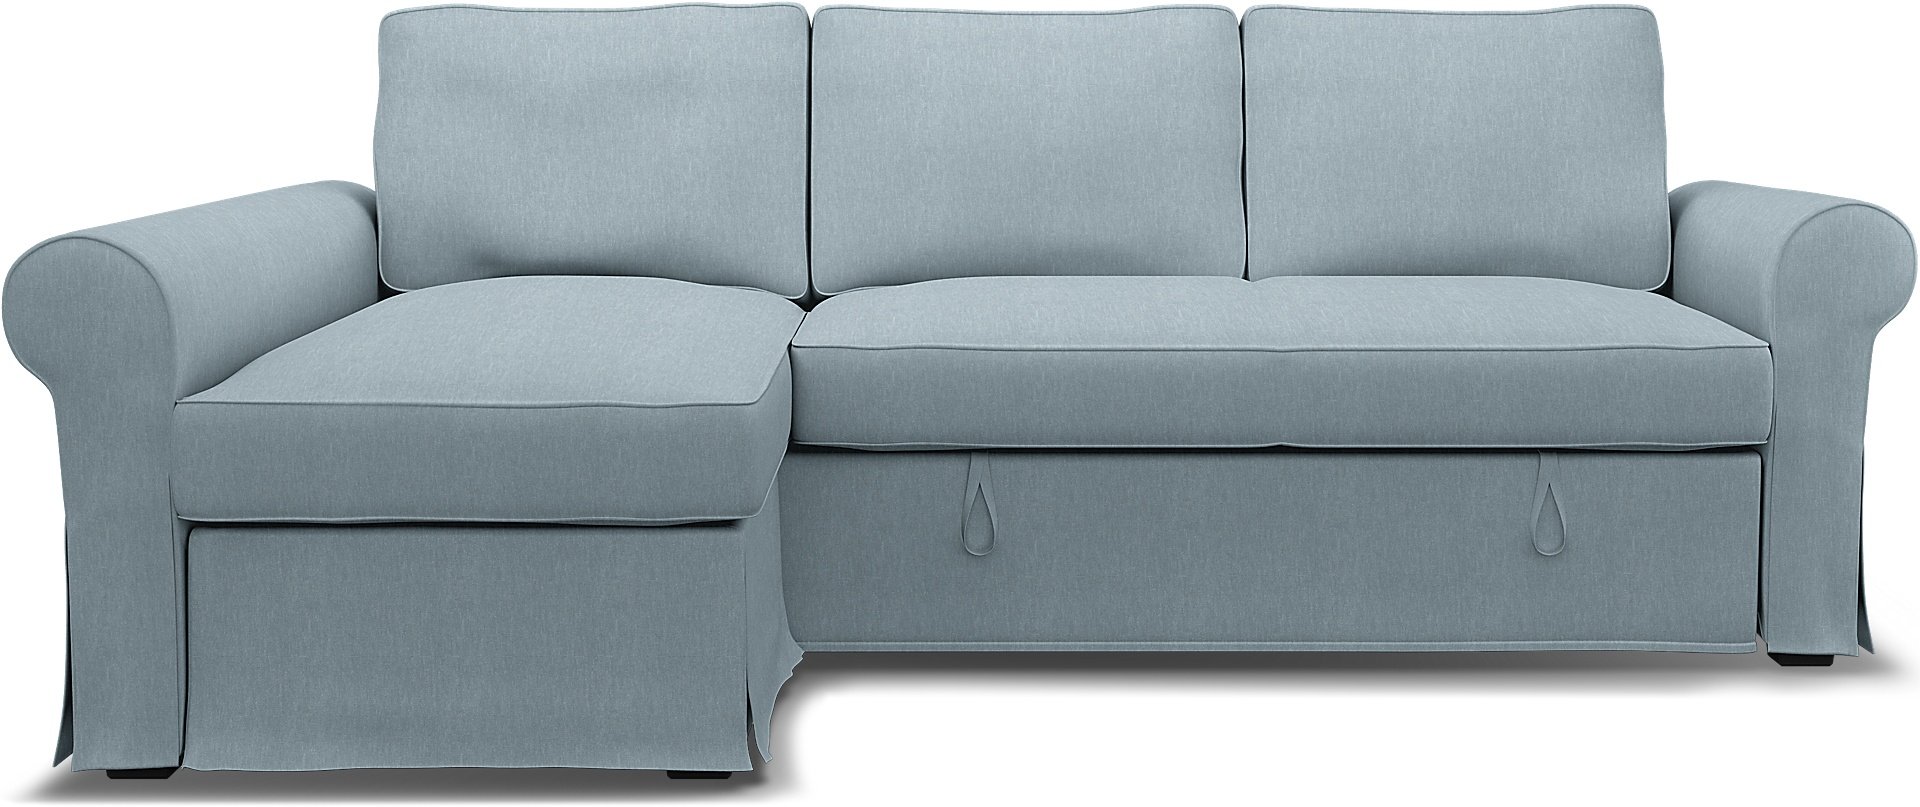 IKEA - Backabro Sofabed with Chaise Cover, Dusty Blue, Linen - Bemz